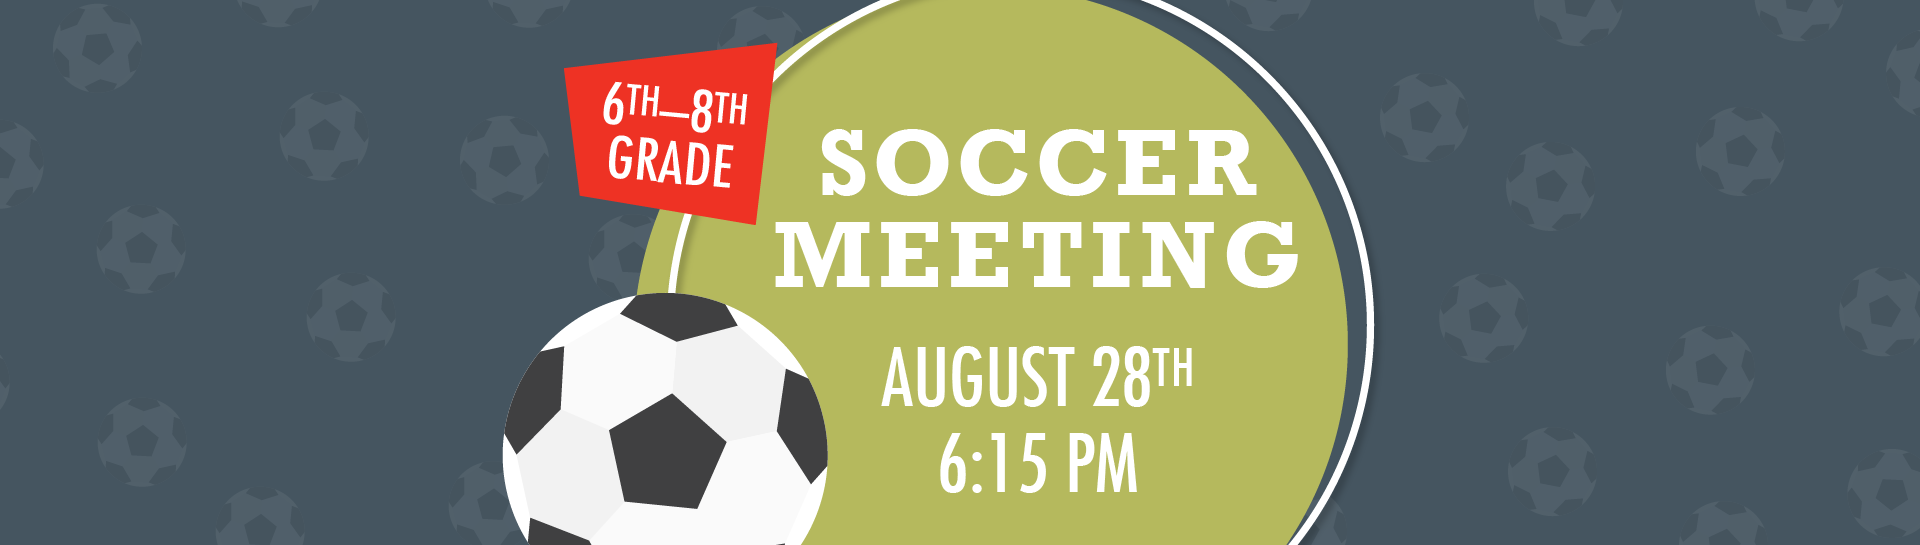 Soccer Meeting August 28th